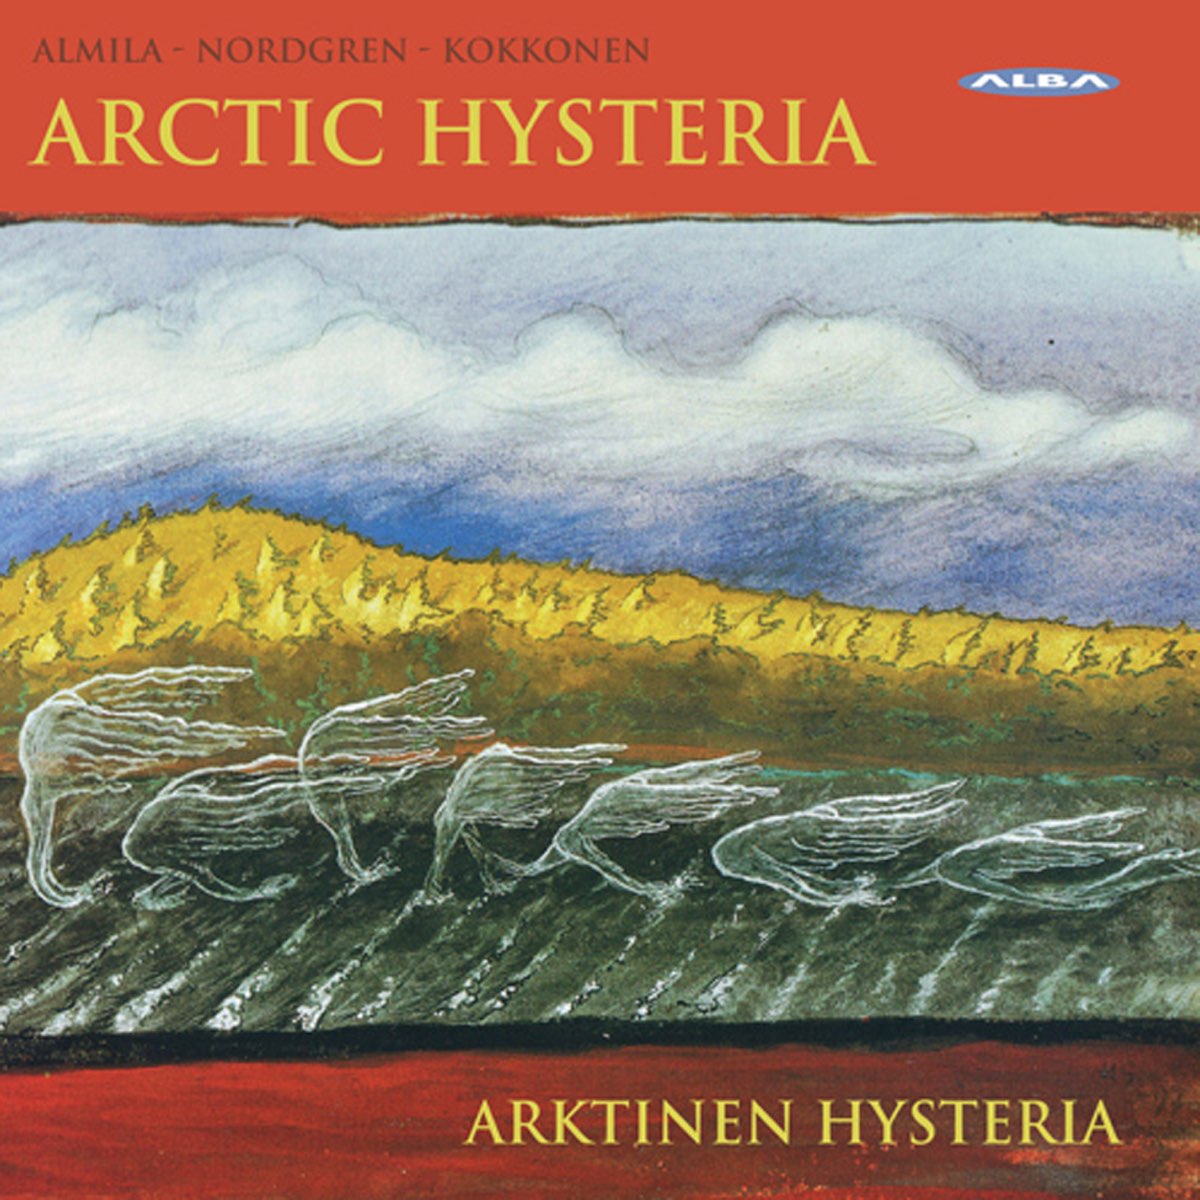 ‎Arctic Hysteria by Arktinen Hysteria on Apple Music